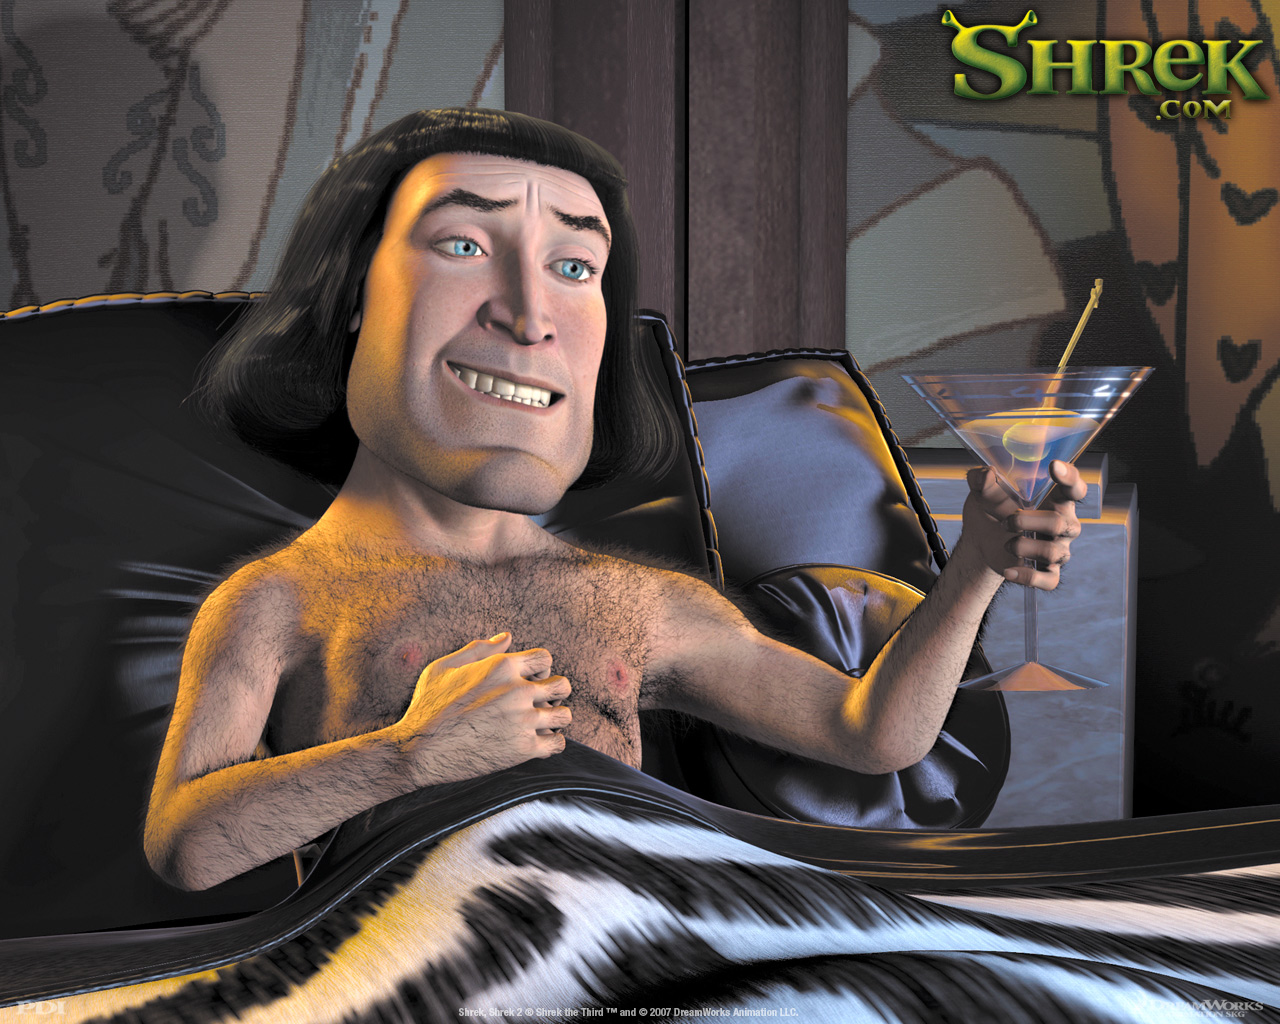 Shrek Forever After - Lord Farquaad Mlg - HD Wallpaper 